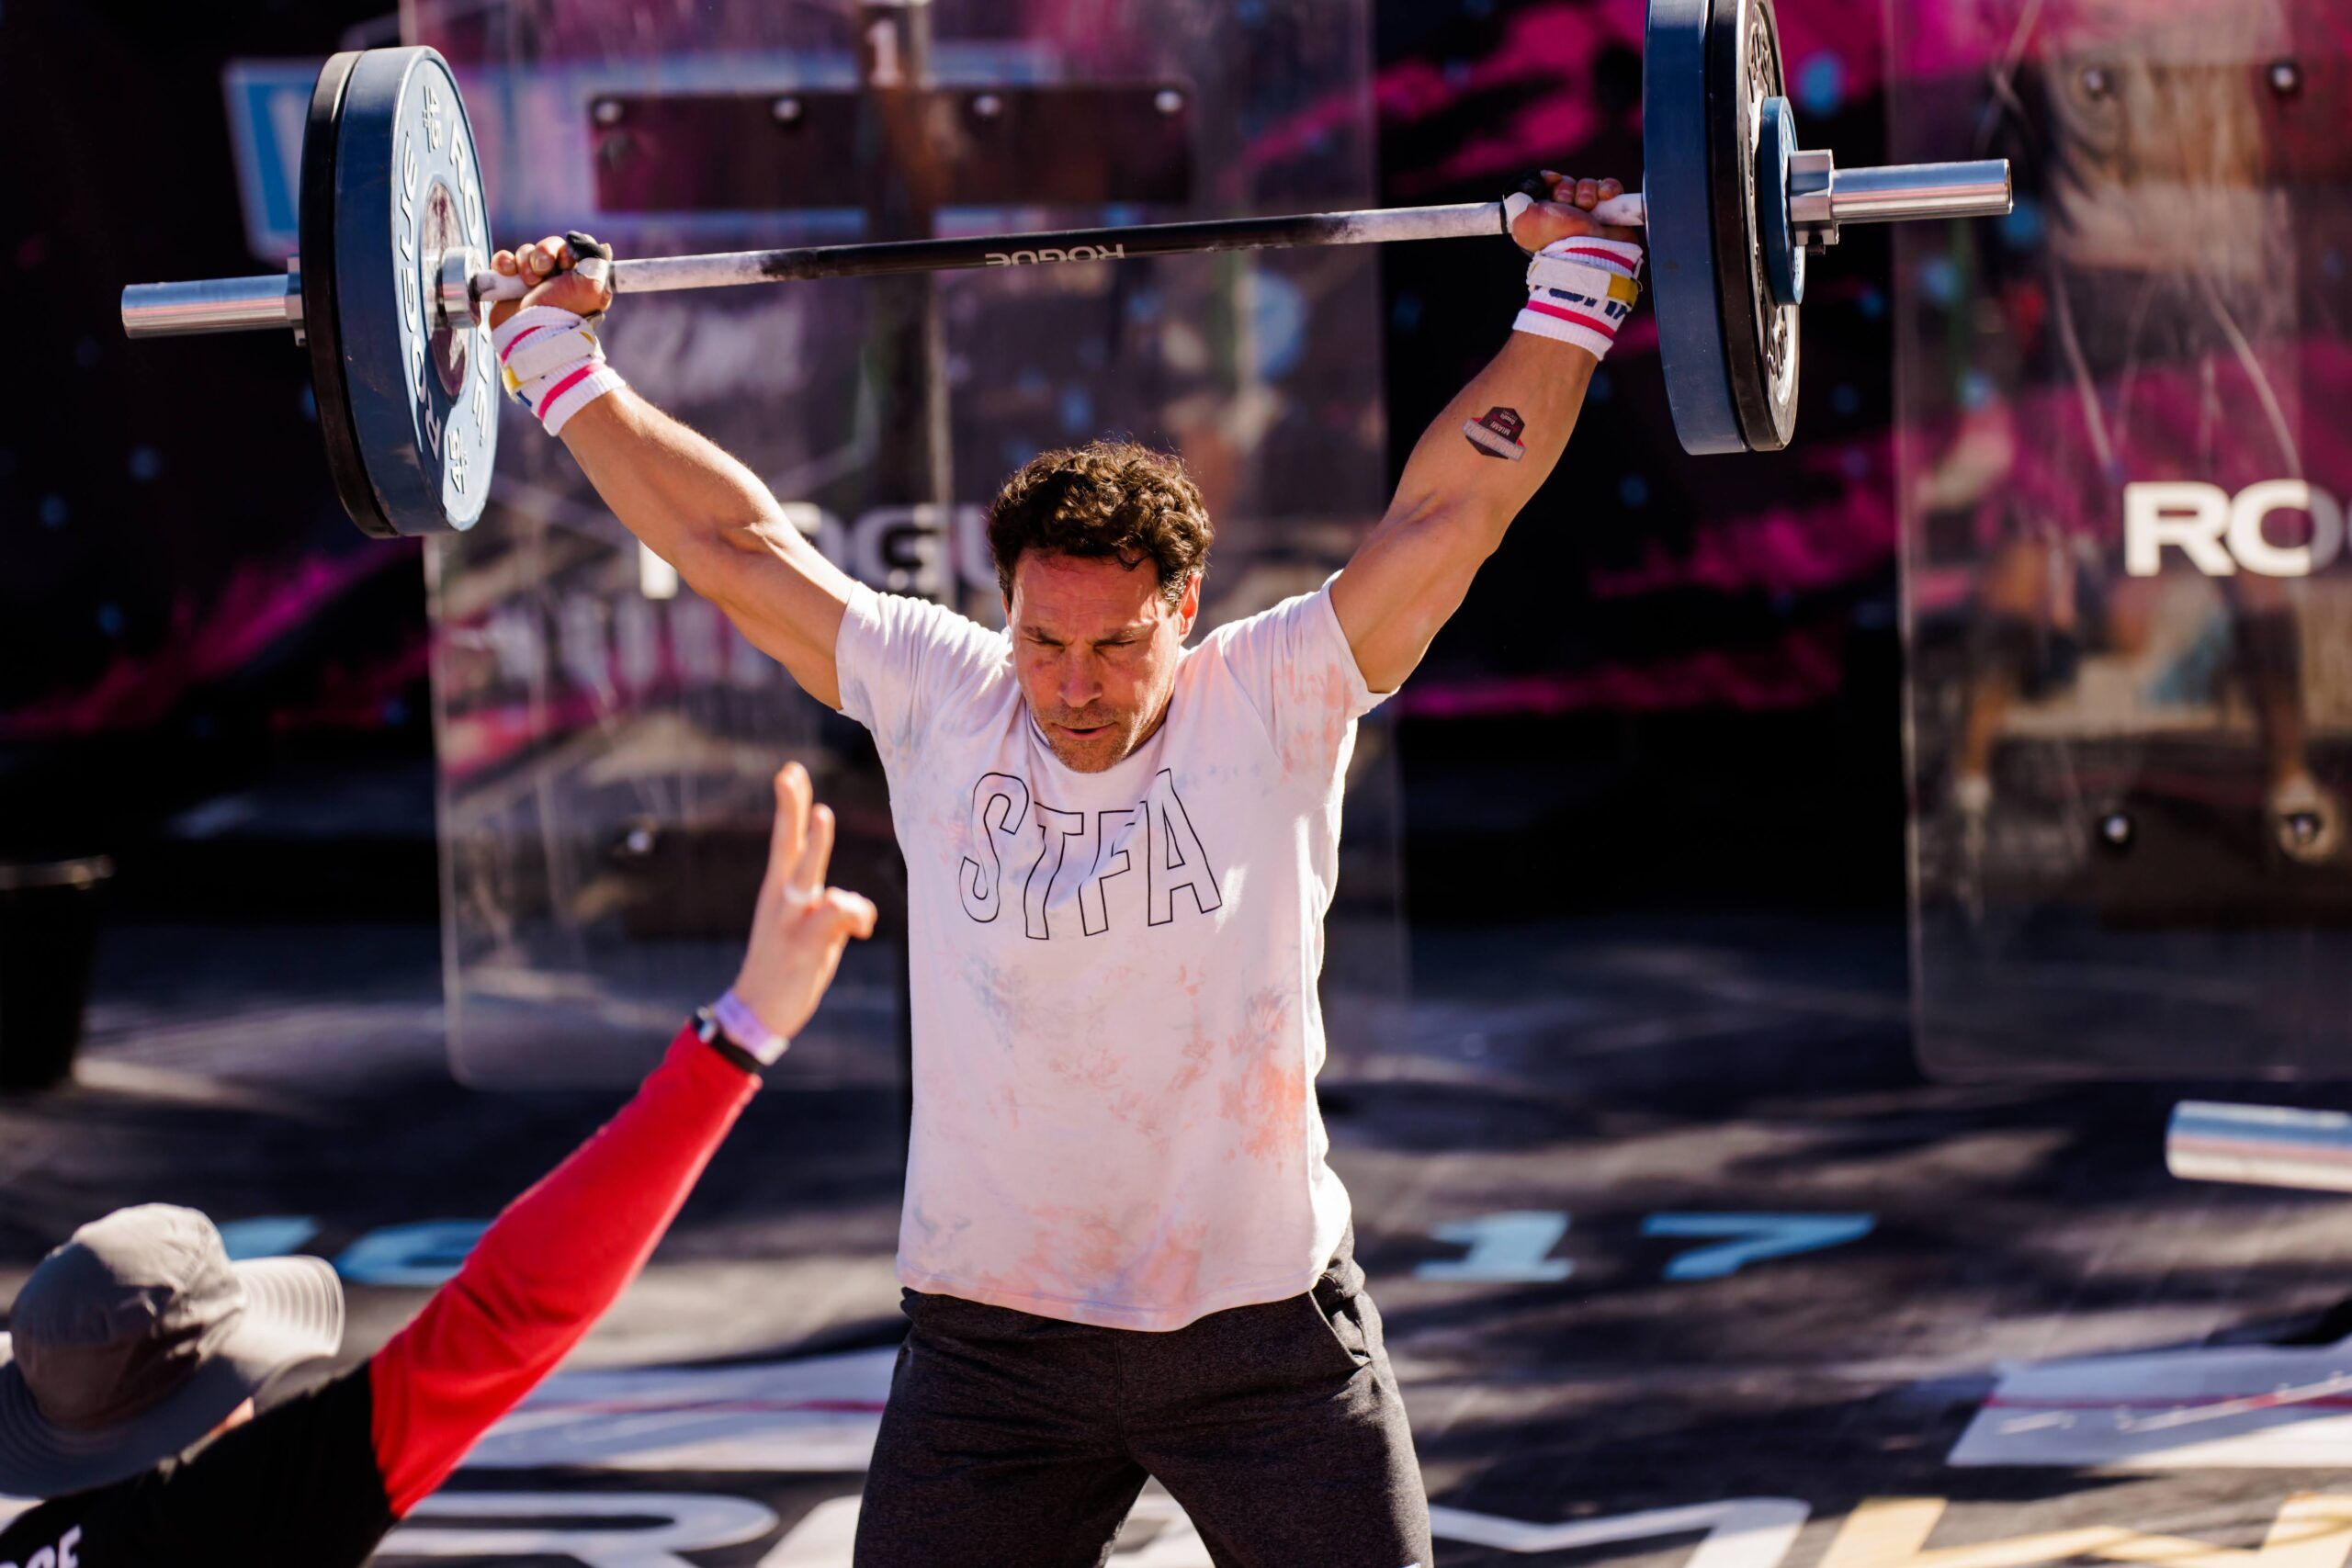 CrossFit Competitions: Preparing Like a Champion